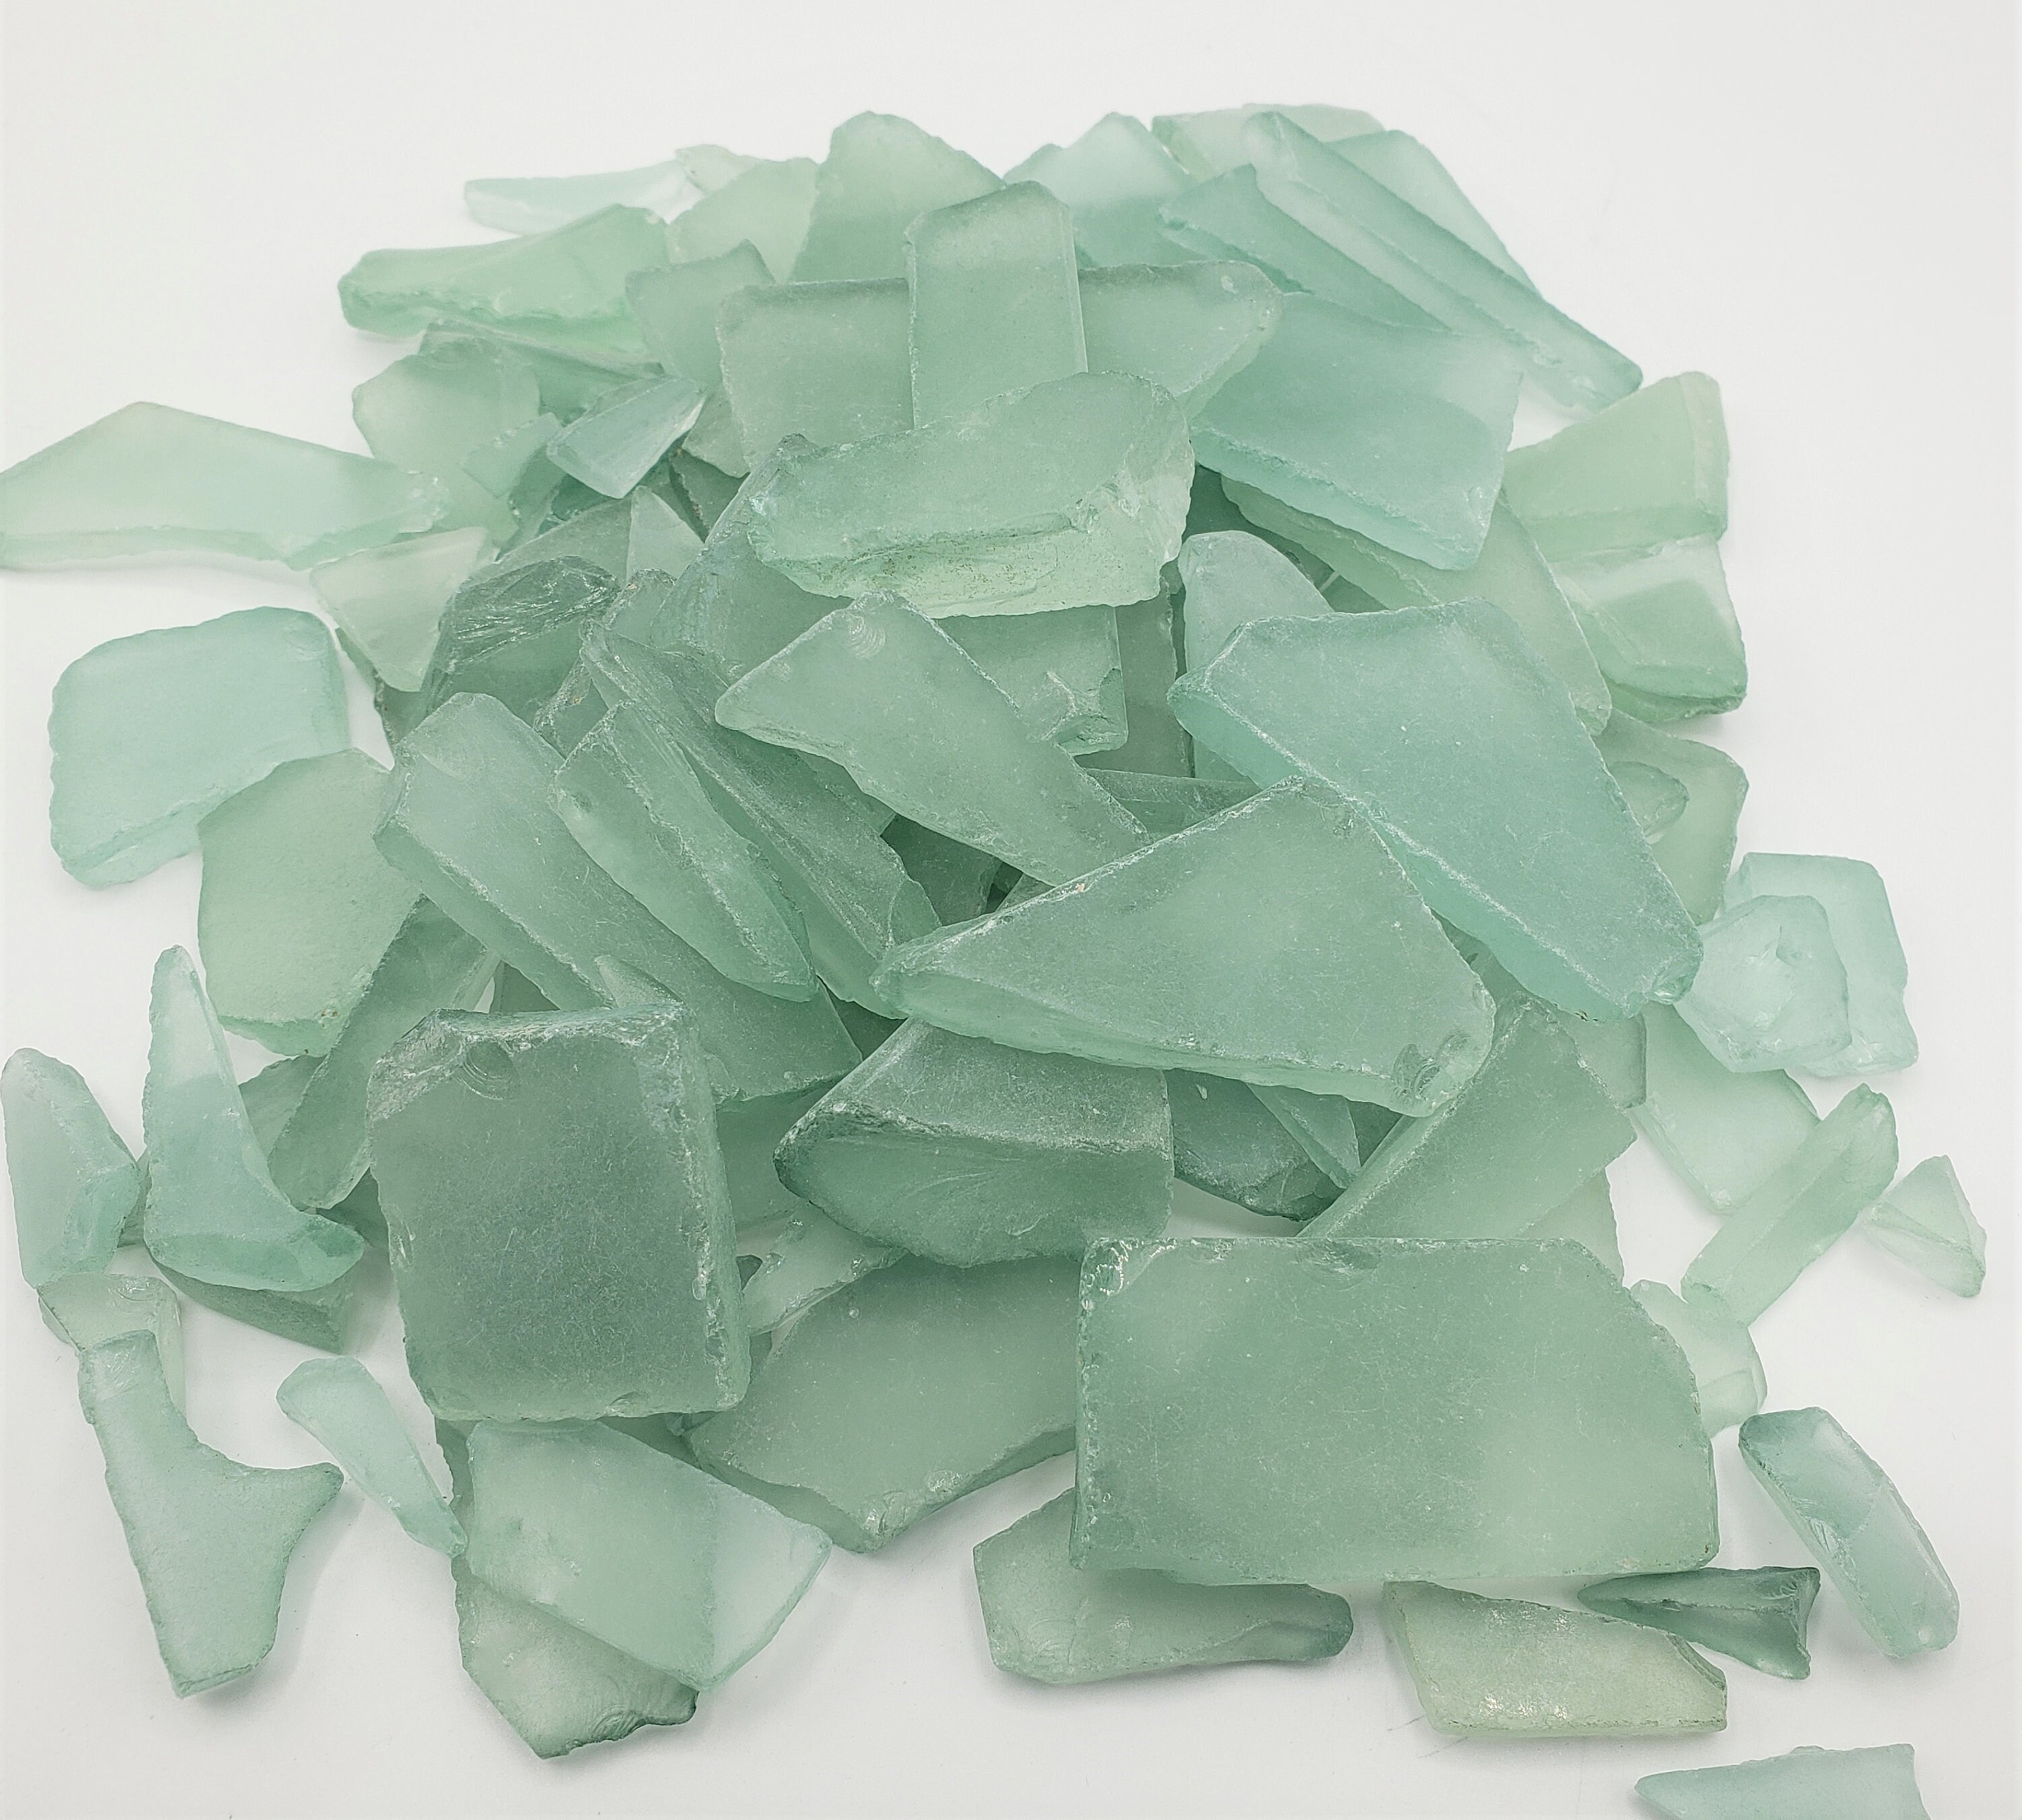 Tumbler Home Sea Glass for Crafts, Decor and Vase Filler. Frosted Beach  Glass in Bulk. 25oz Assorted Colors Seaglass Pieces